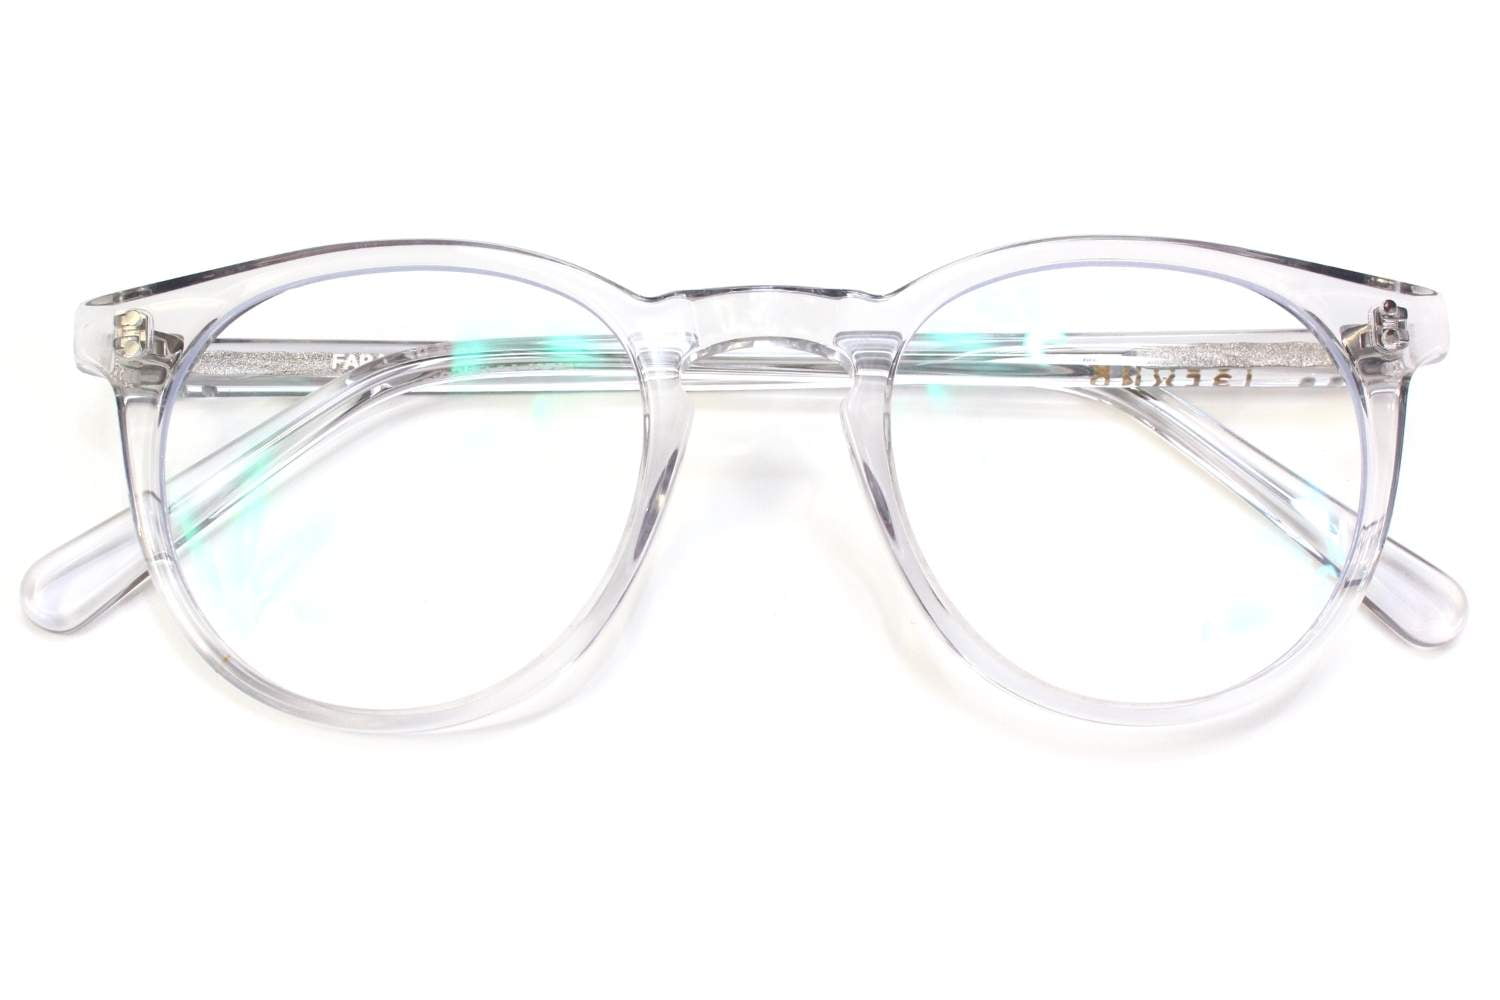 Clear Versace Glasses Cheap Offers, Save 63% | jlcatj.gob.mx